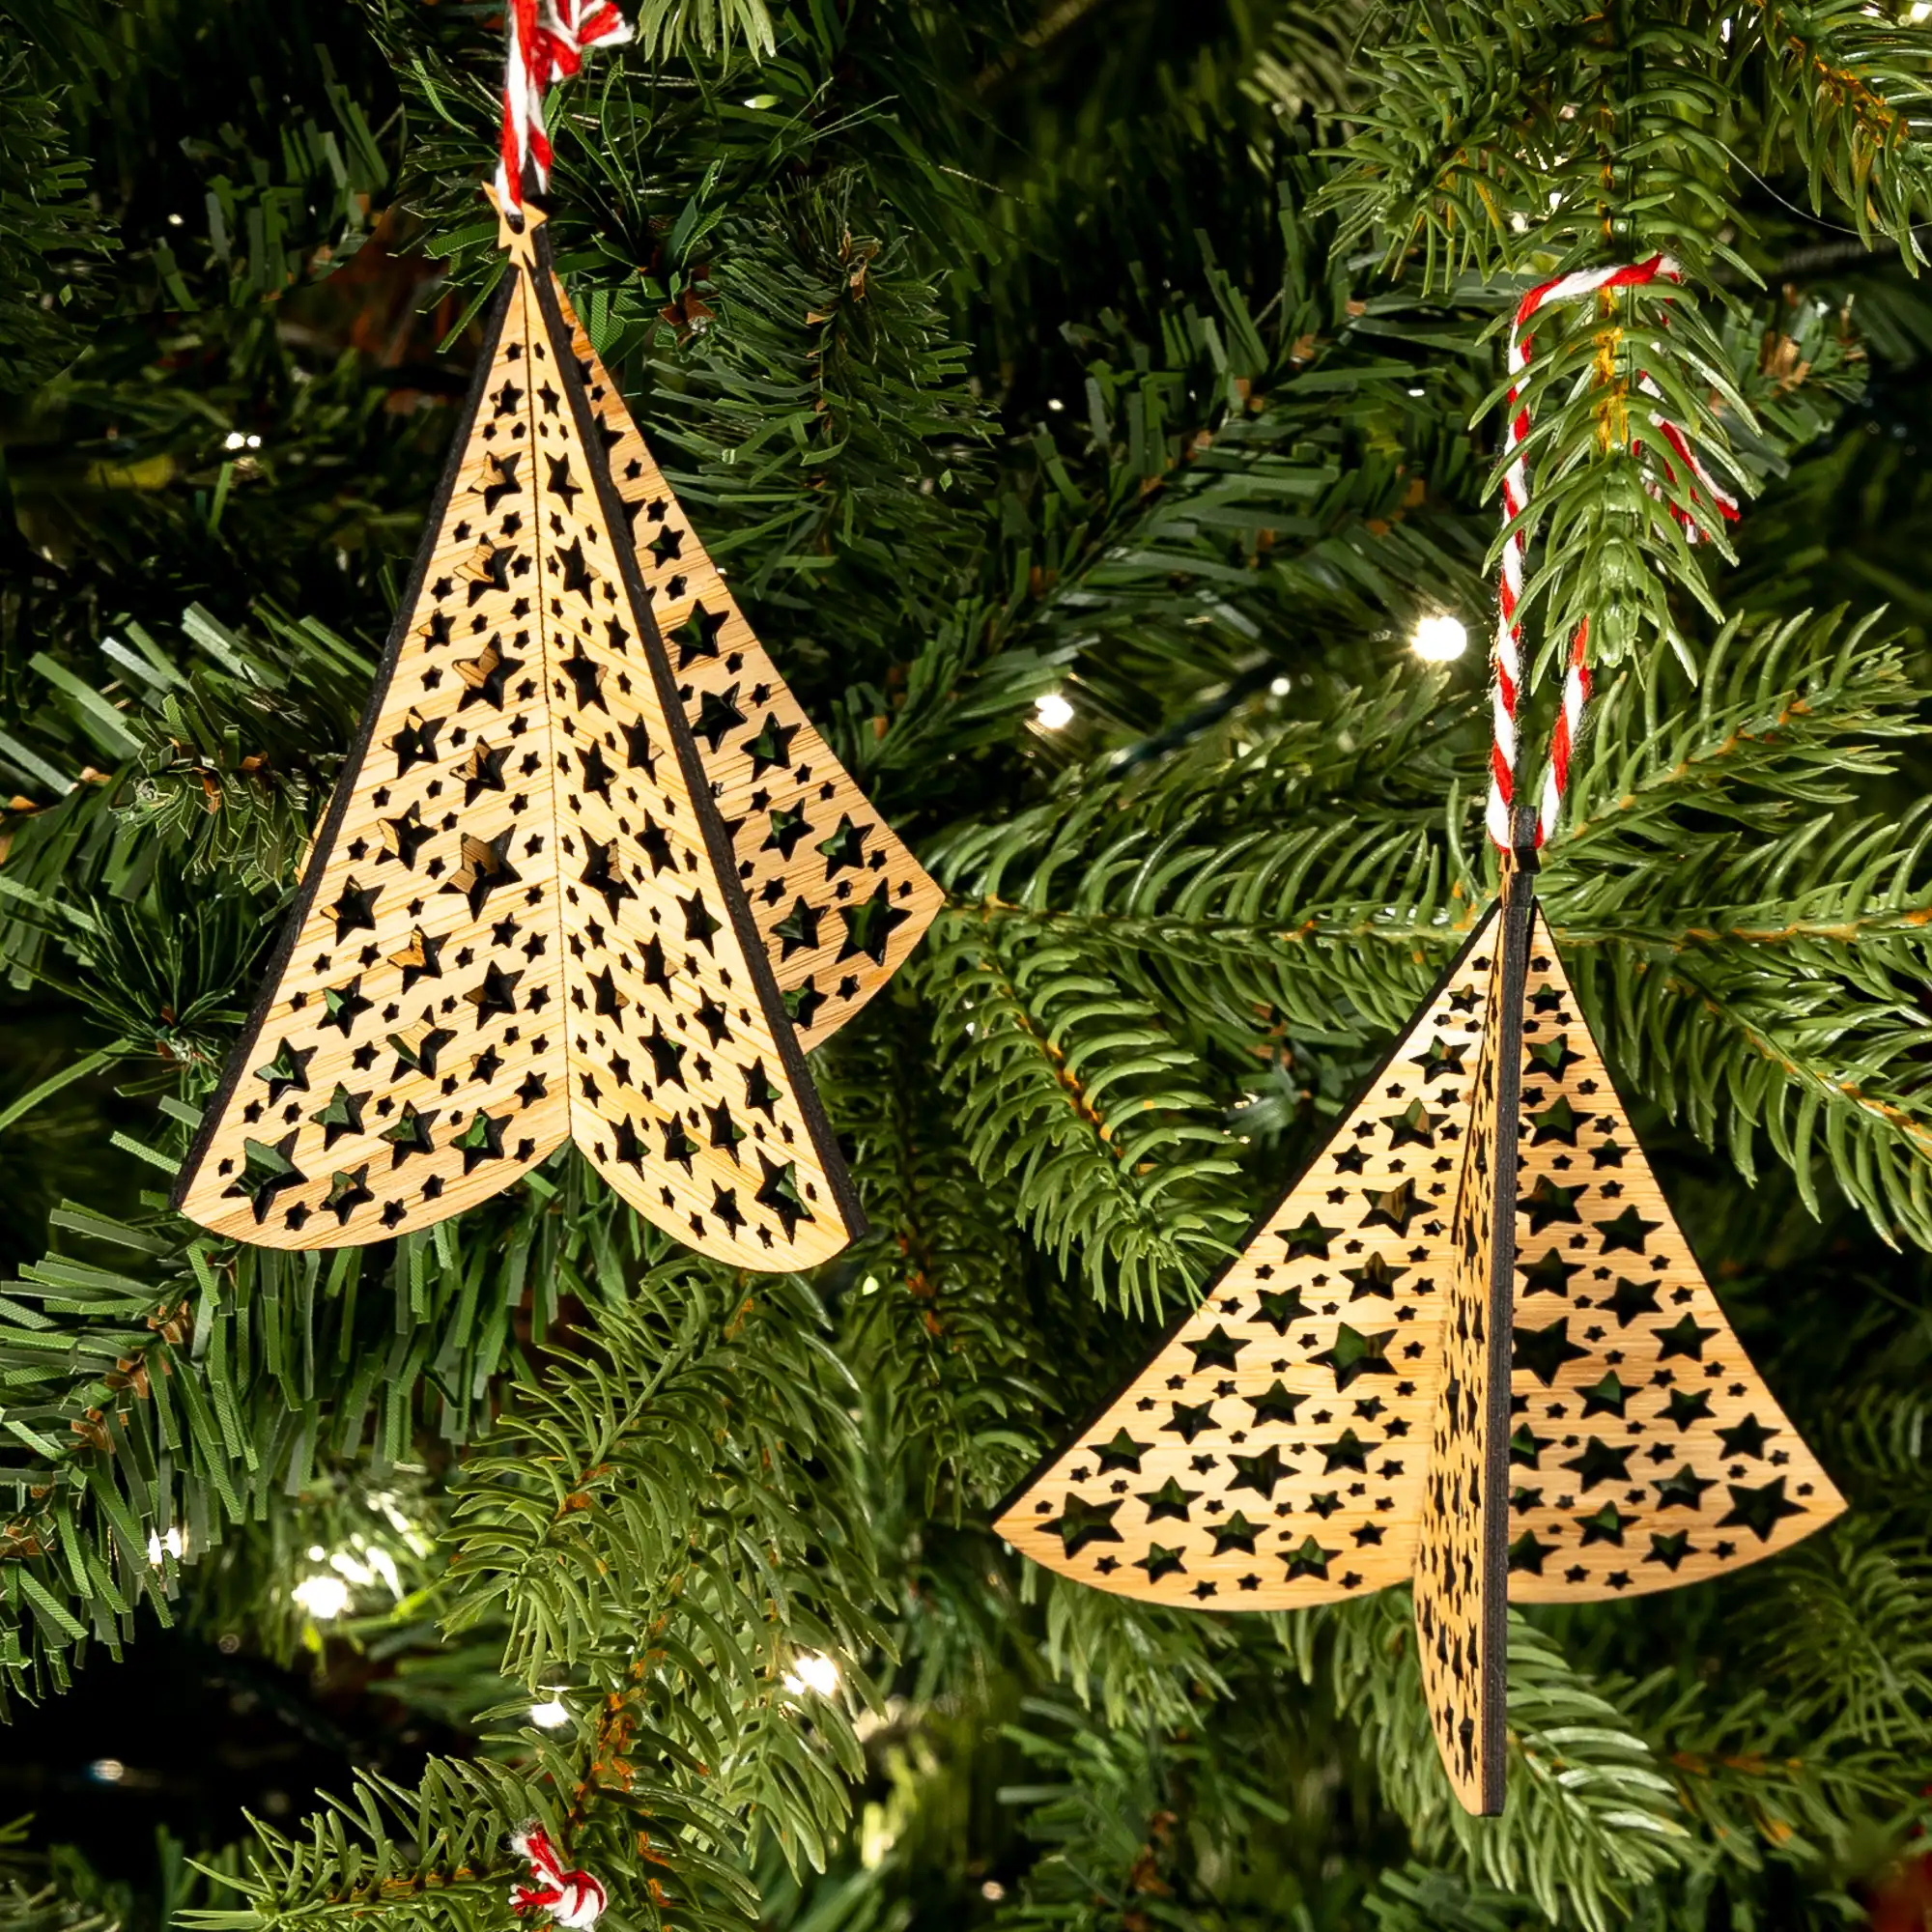 Bamboo Hanging Christmas Tree Decorations - Eco-friendly gifts and ornaments - Kyloe Creations